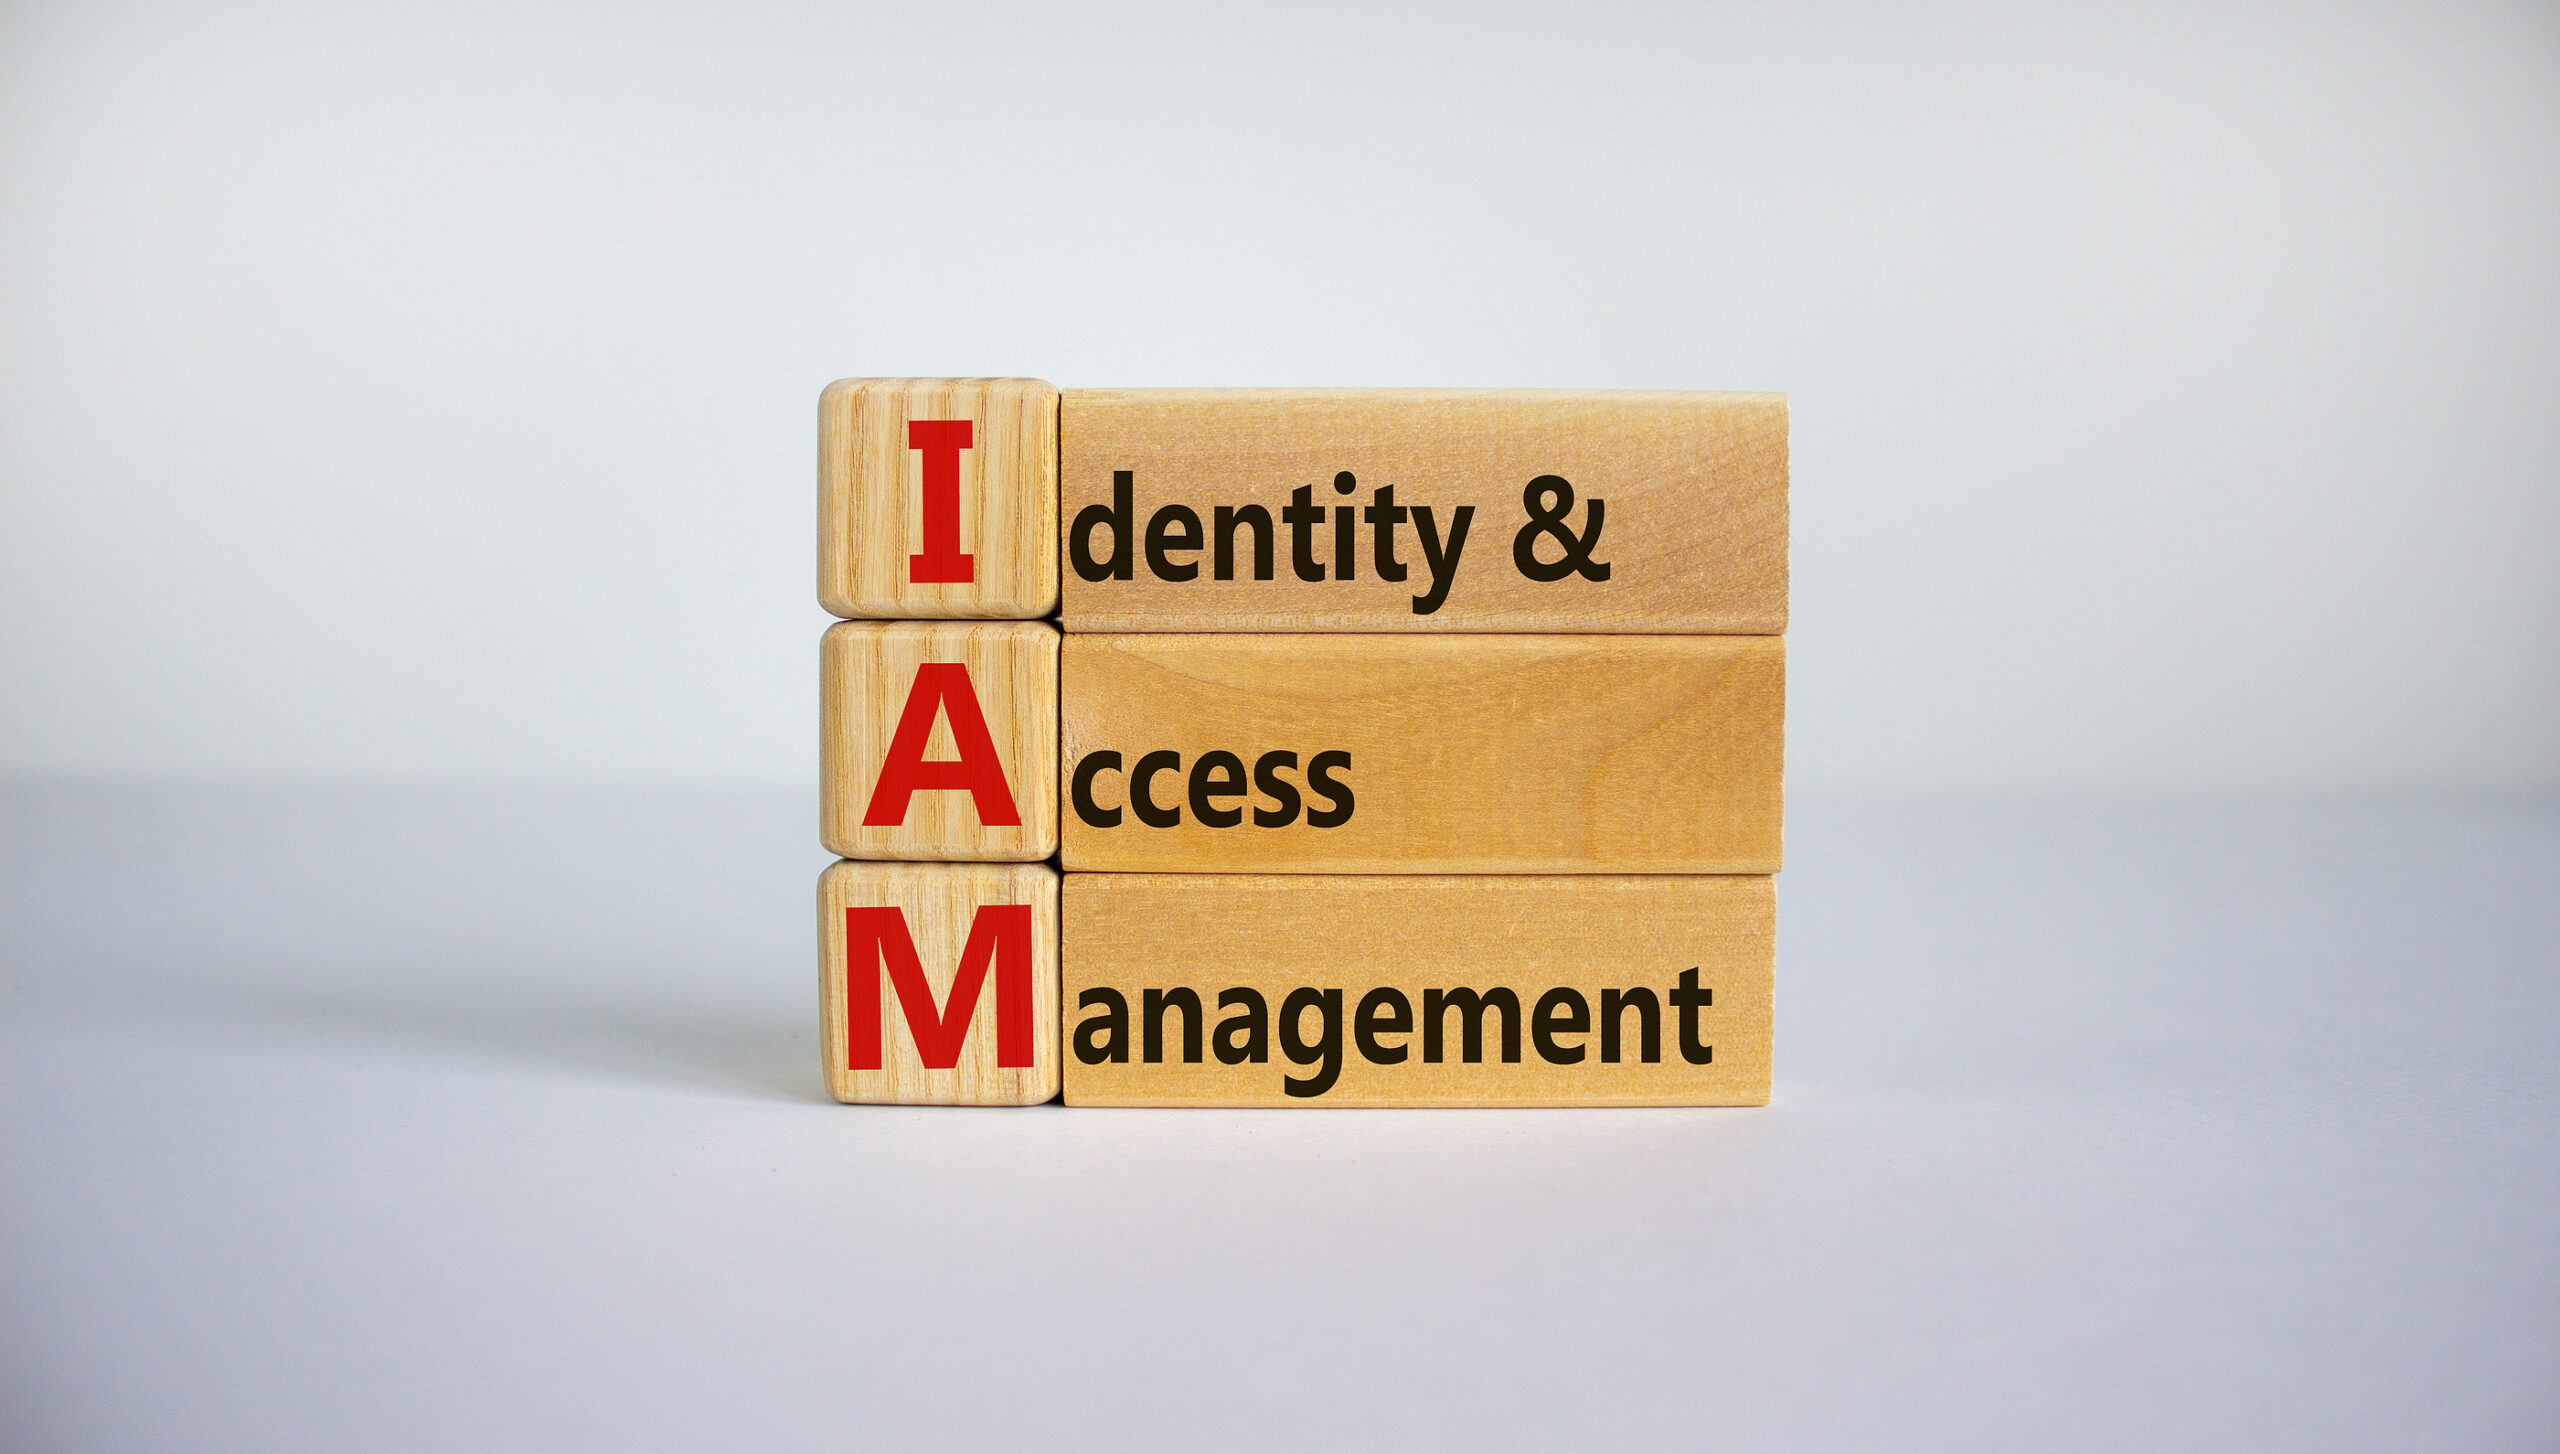 5 Advantages of Identity & Access Management in Education